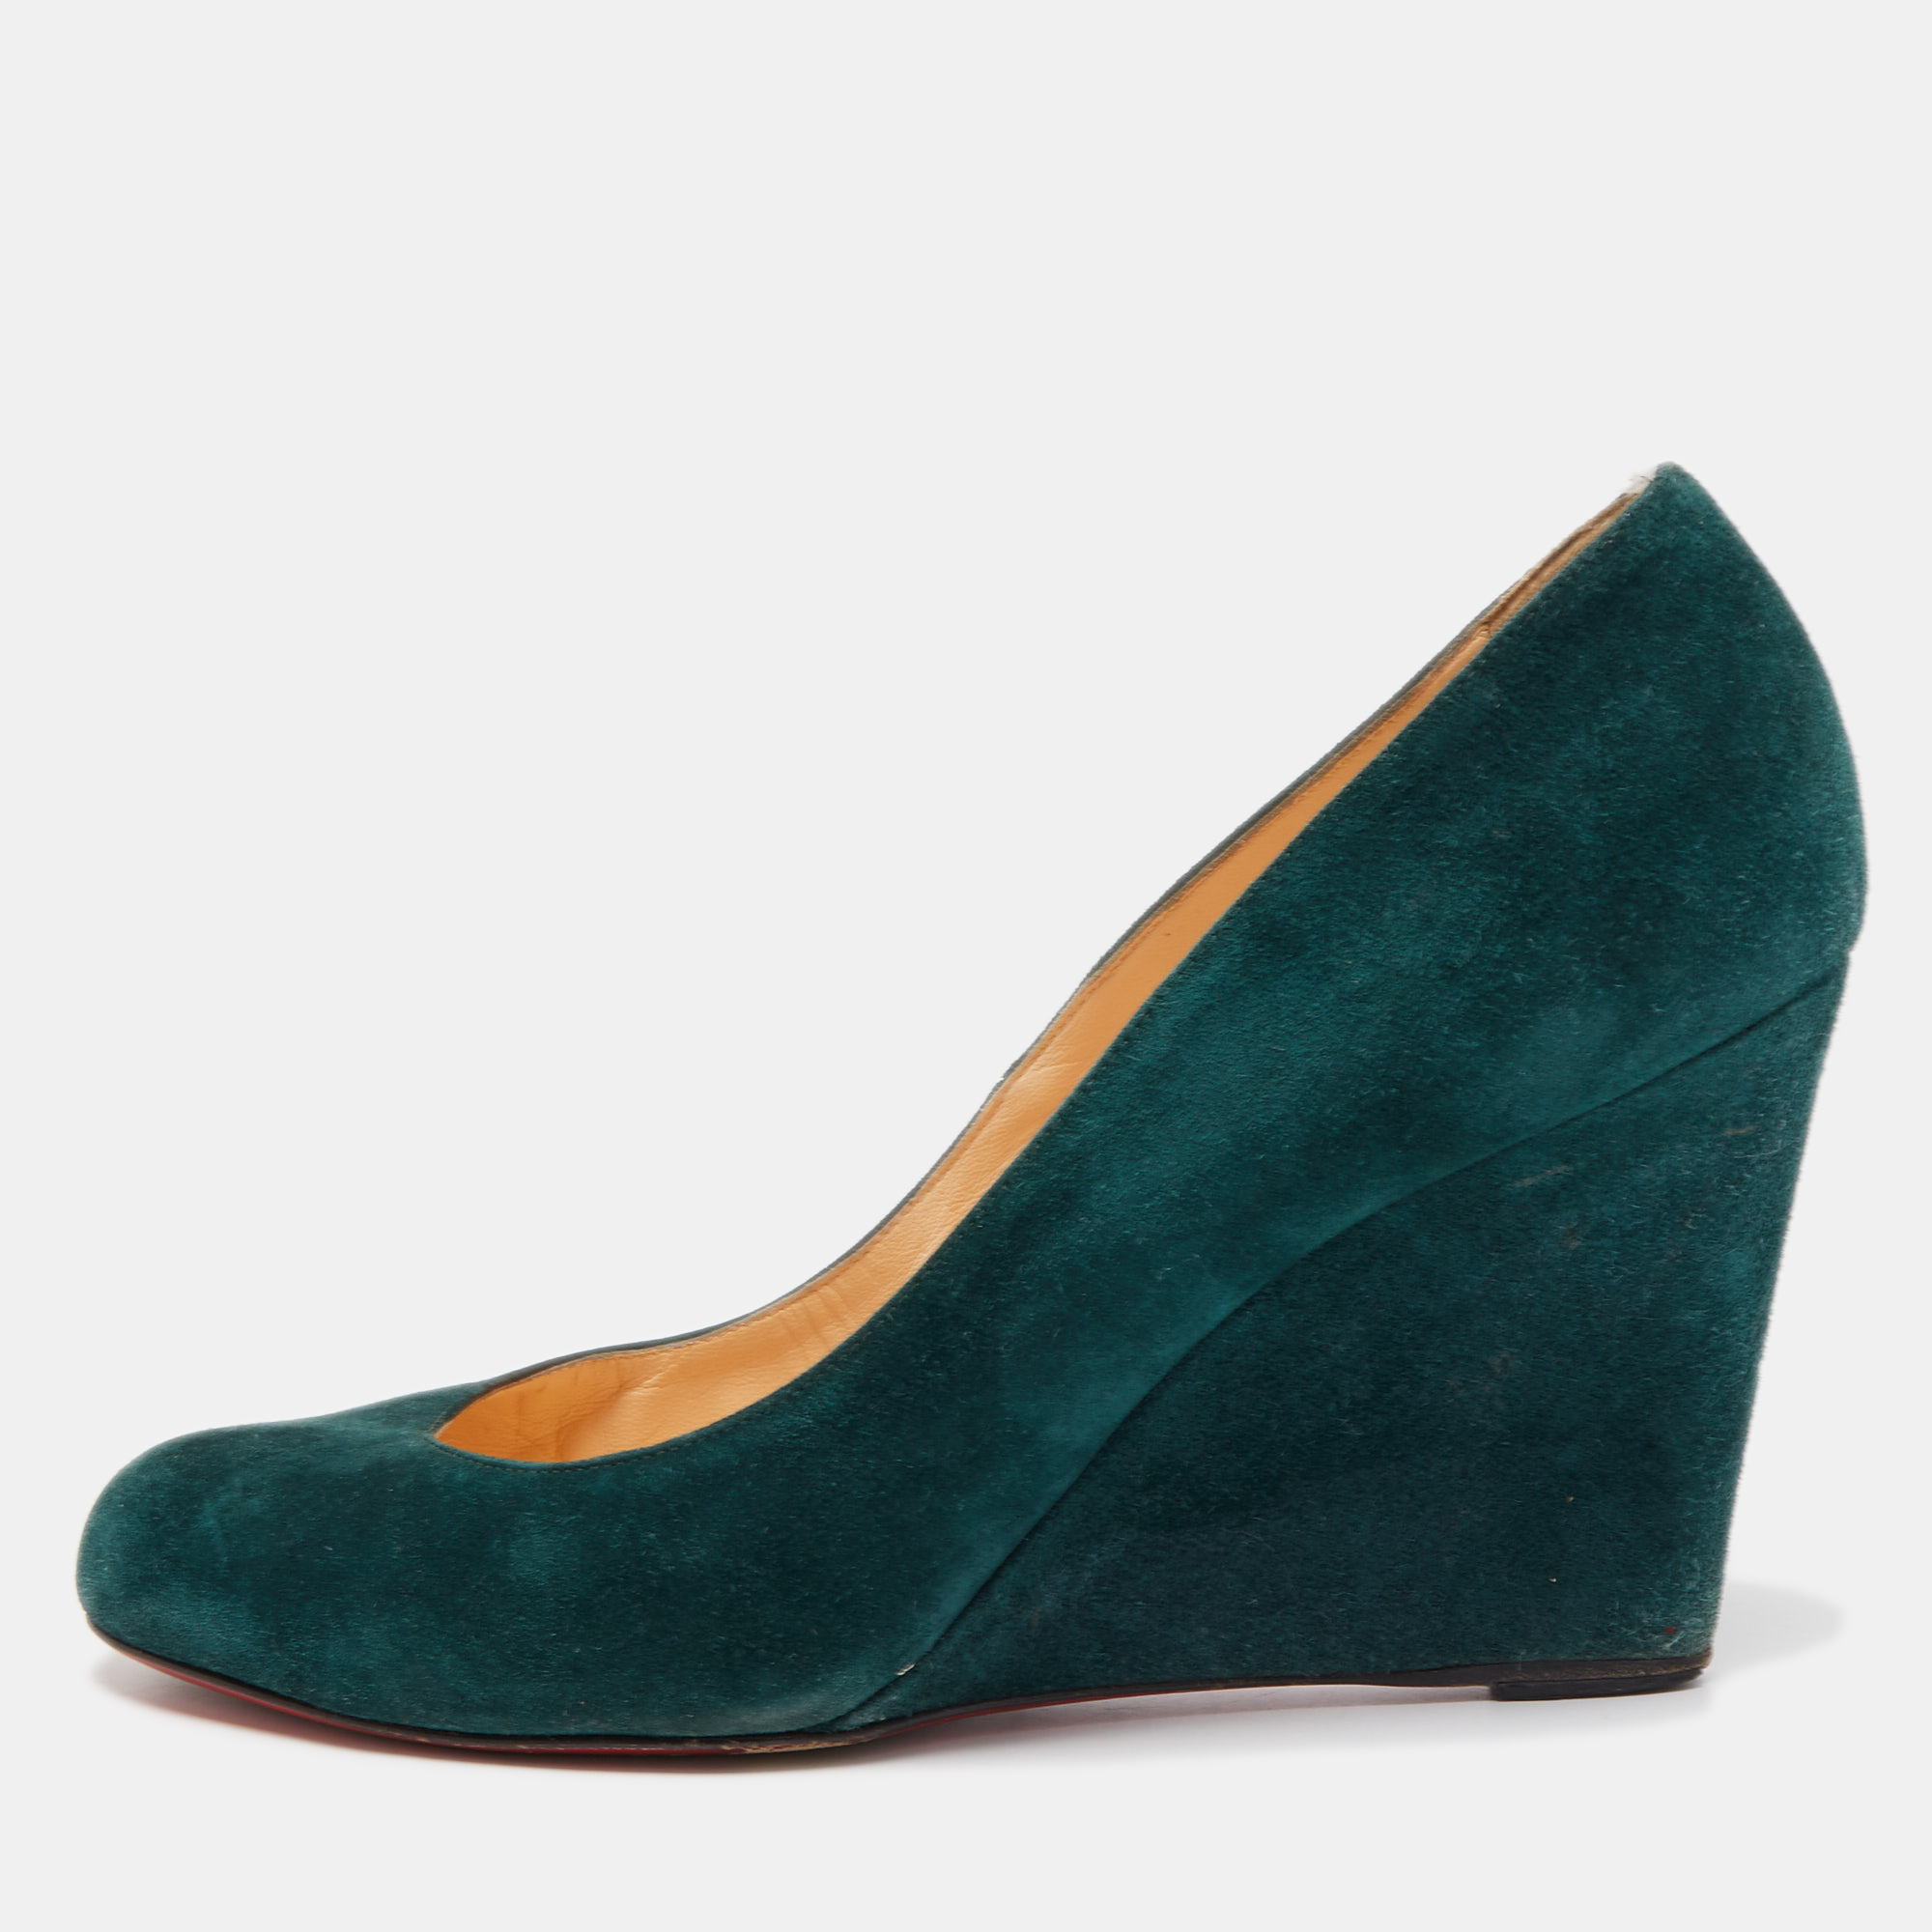 Pre-owned Christian Louboutin Dark Green Suede Ronron Zeppa Pumps Size 40.5